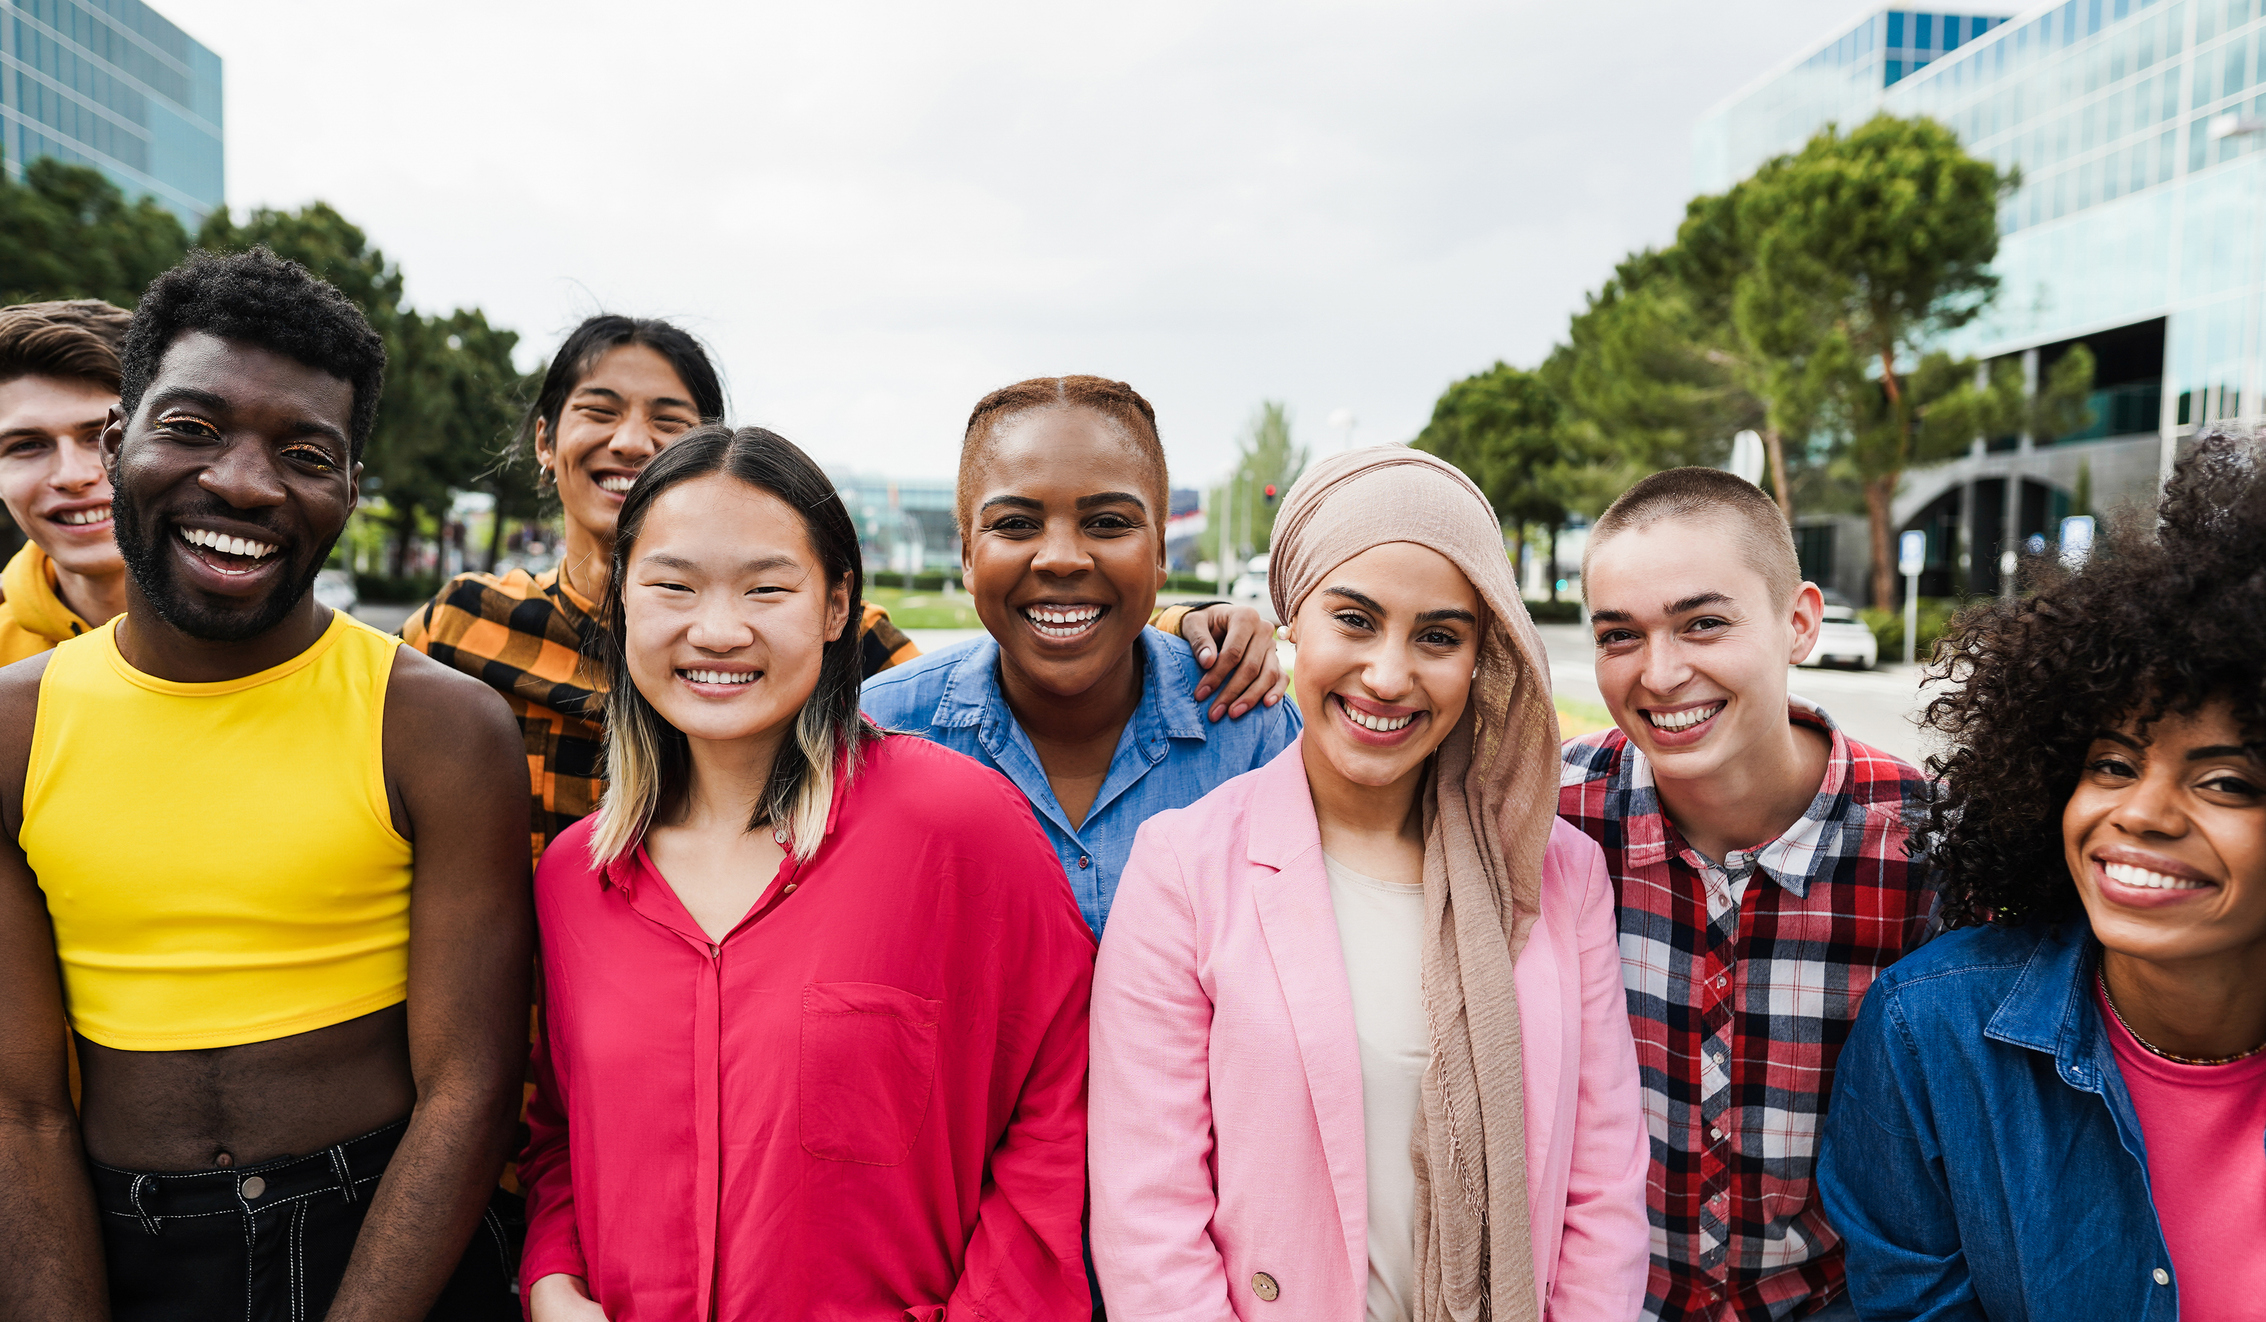 A multi-racial group of people stand together outside and smile in front of the camera